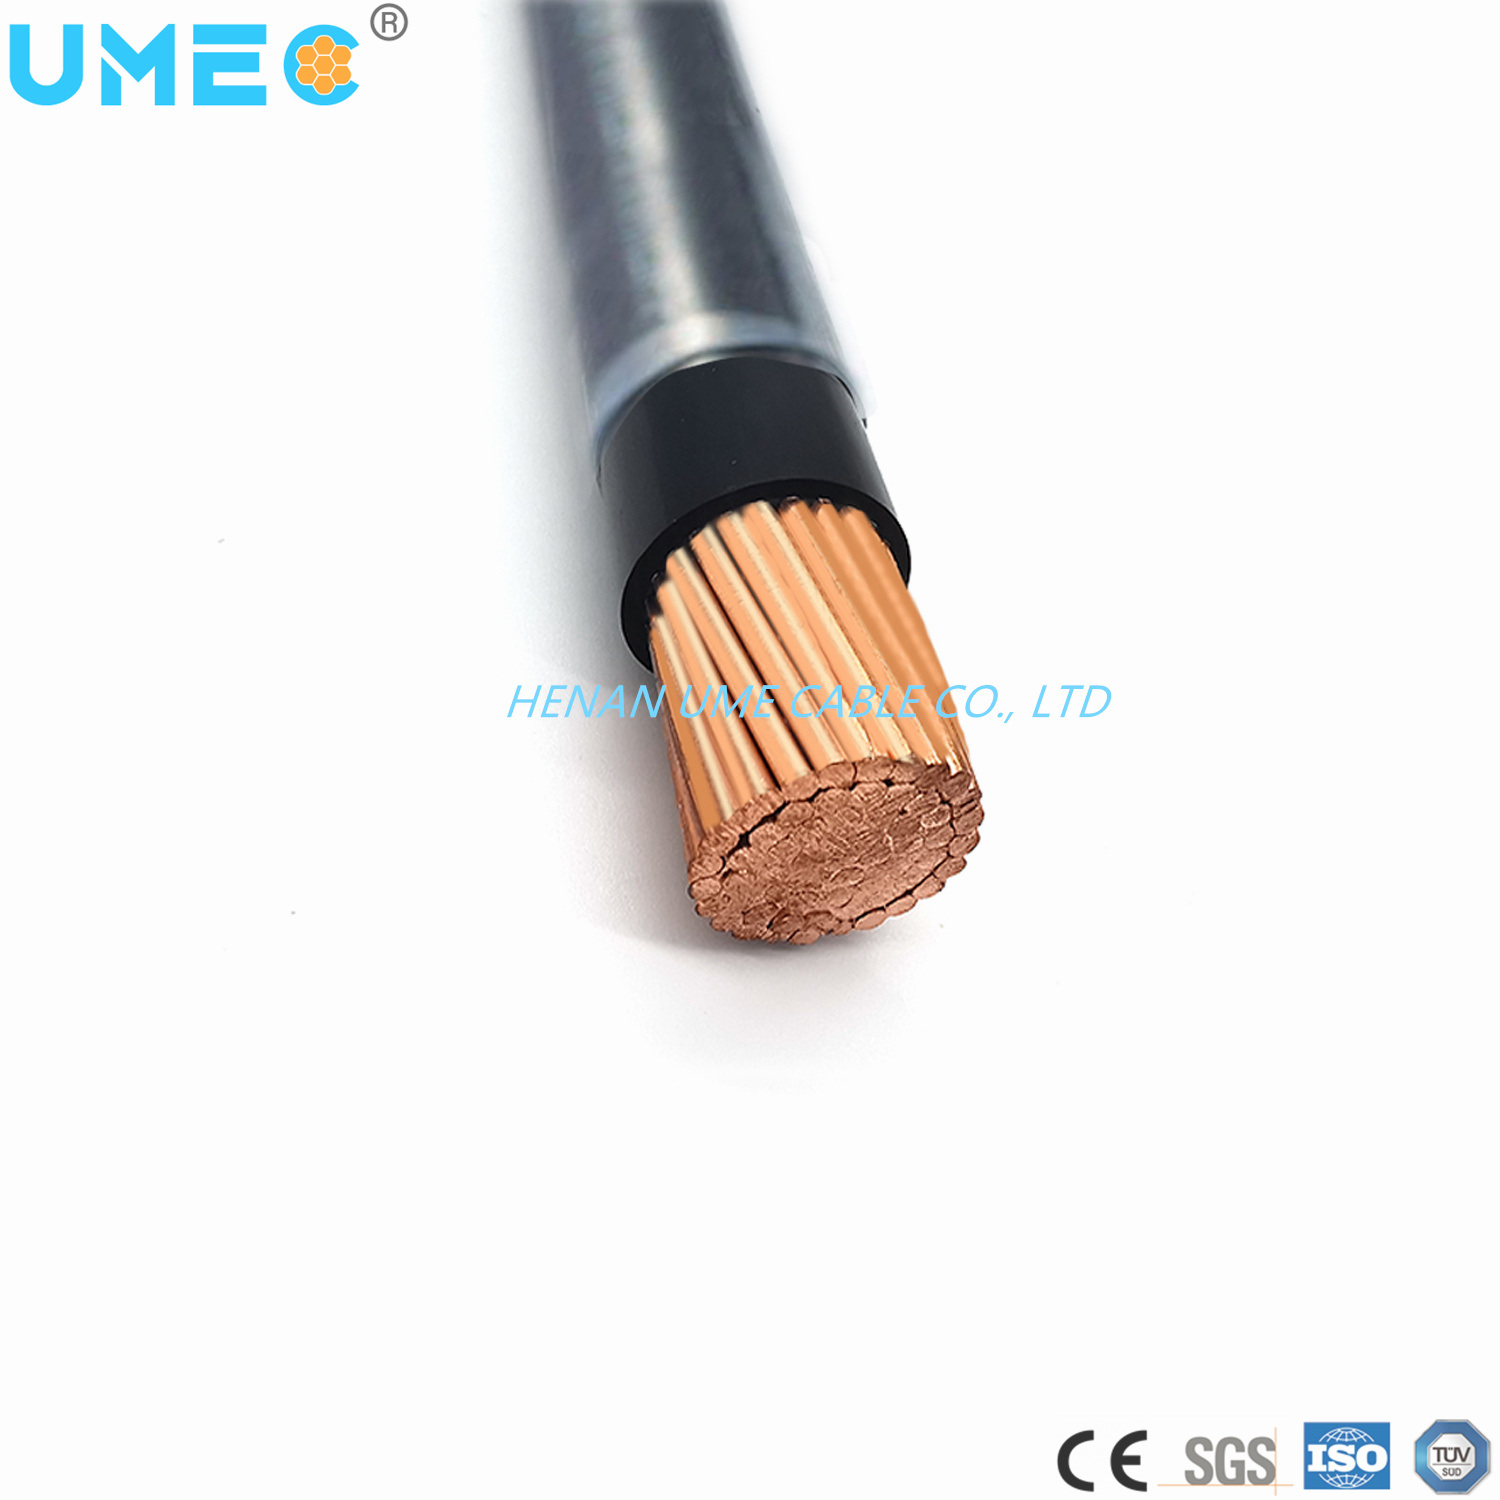 UL1316 Heating Cable PVC Insulated Nylon Sheath Coated Wire 10AWG 12 AWG 14 AWG Thhn Thwn Electric Wire